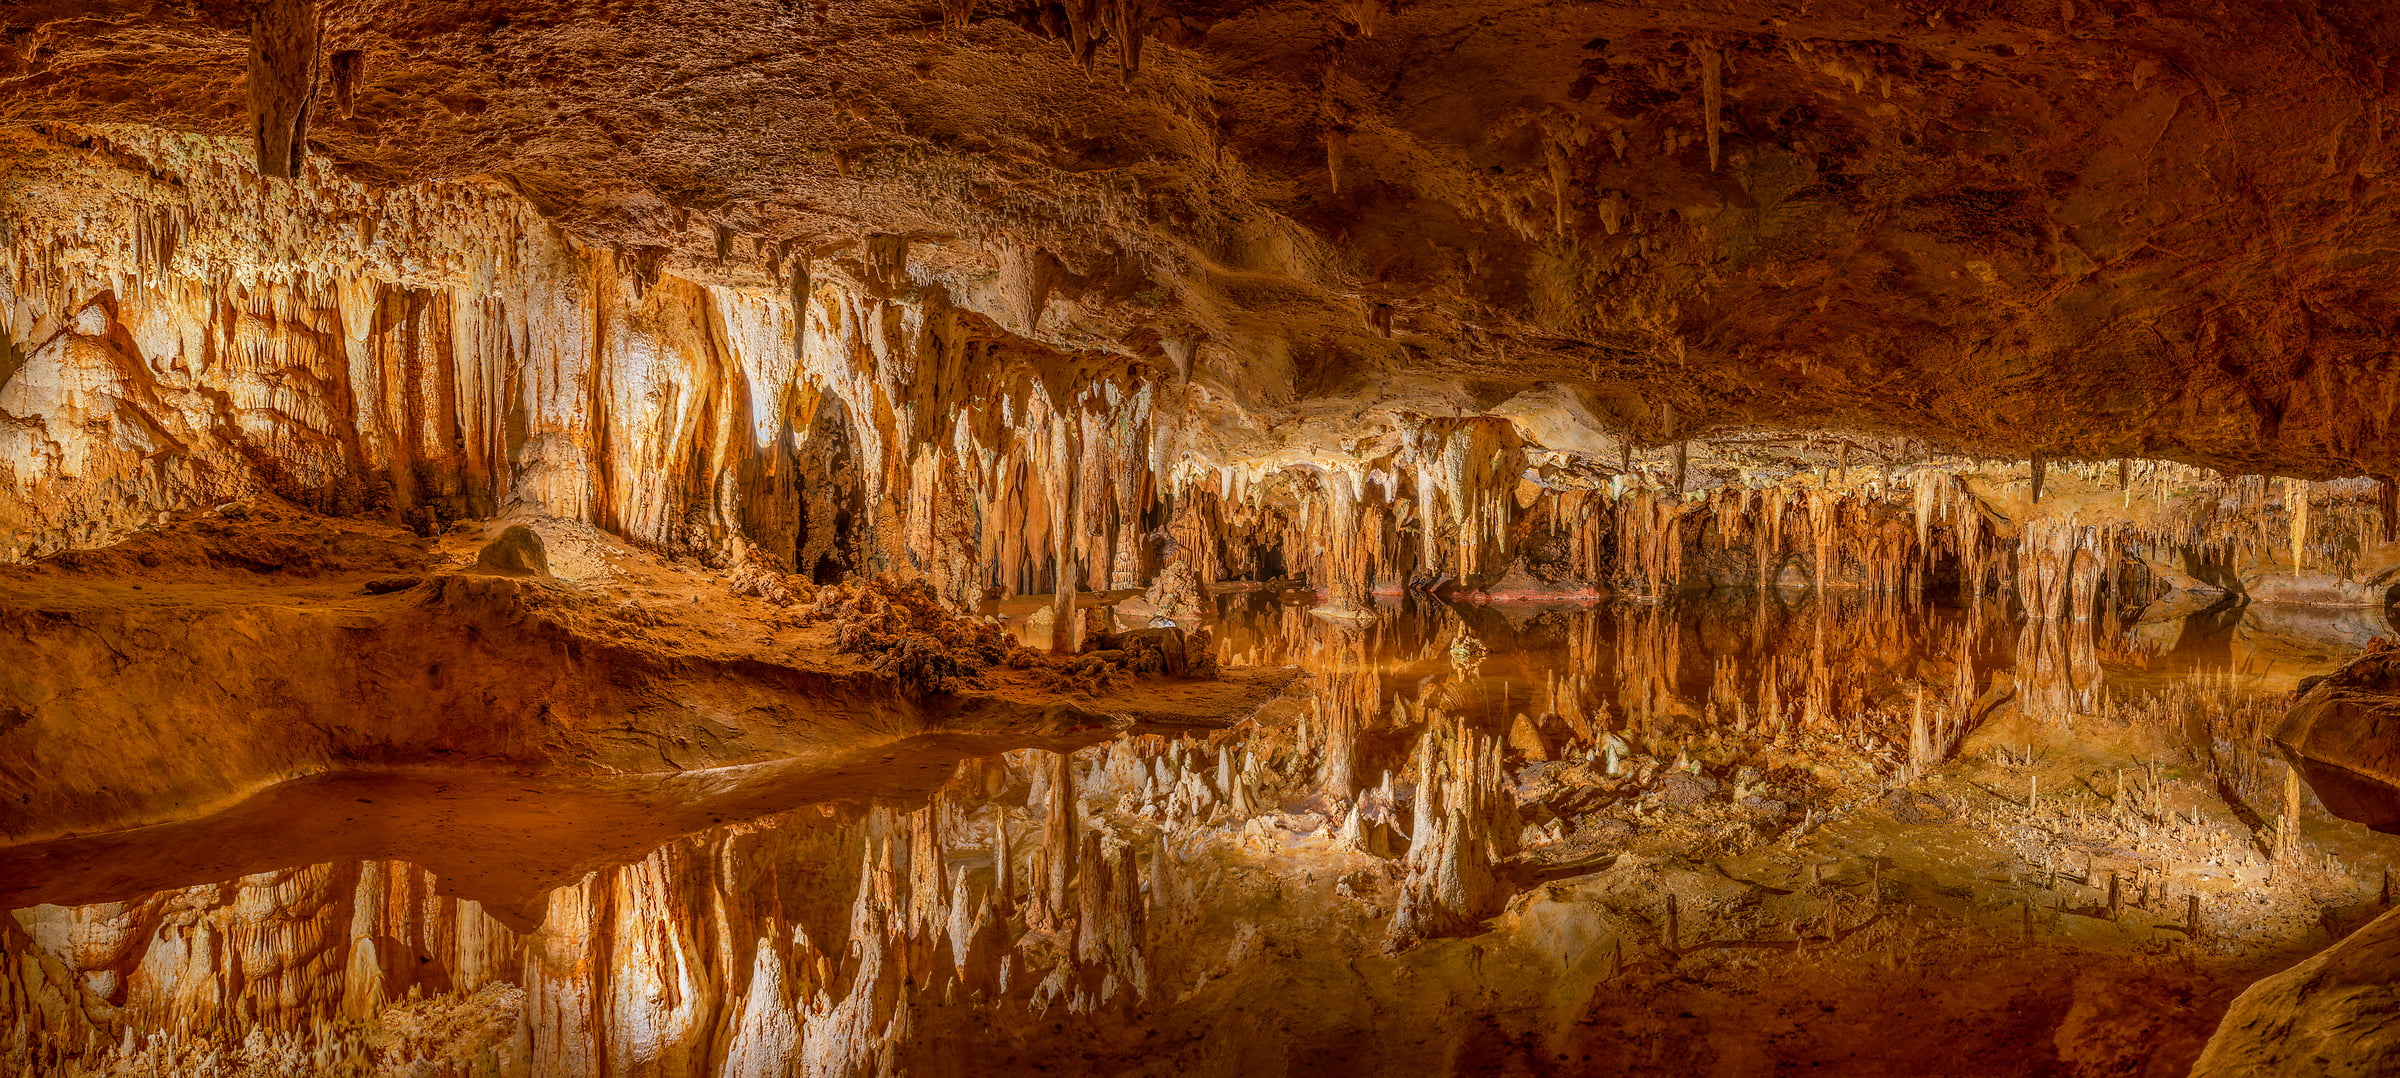 744 megapixels! A very high resolution, large-format VAST photo print of a cave with an underground lake, stalagmites, and stalactites; panorama photograph created by Tim Lo Monaco in Dream Lake, Luray Caverns, Shenandoah Valley, Luray, Virginia